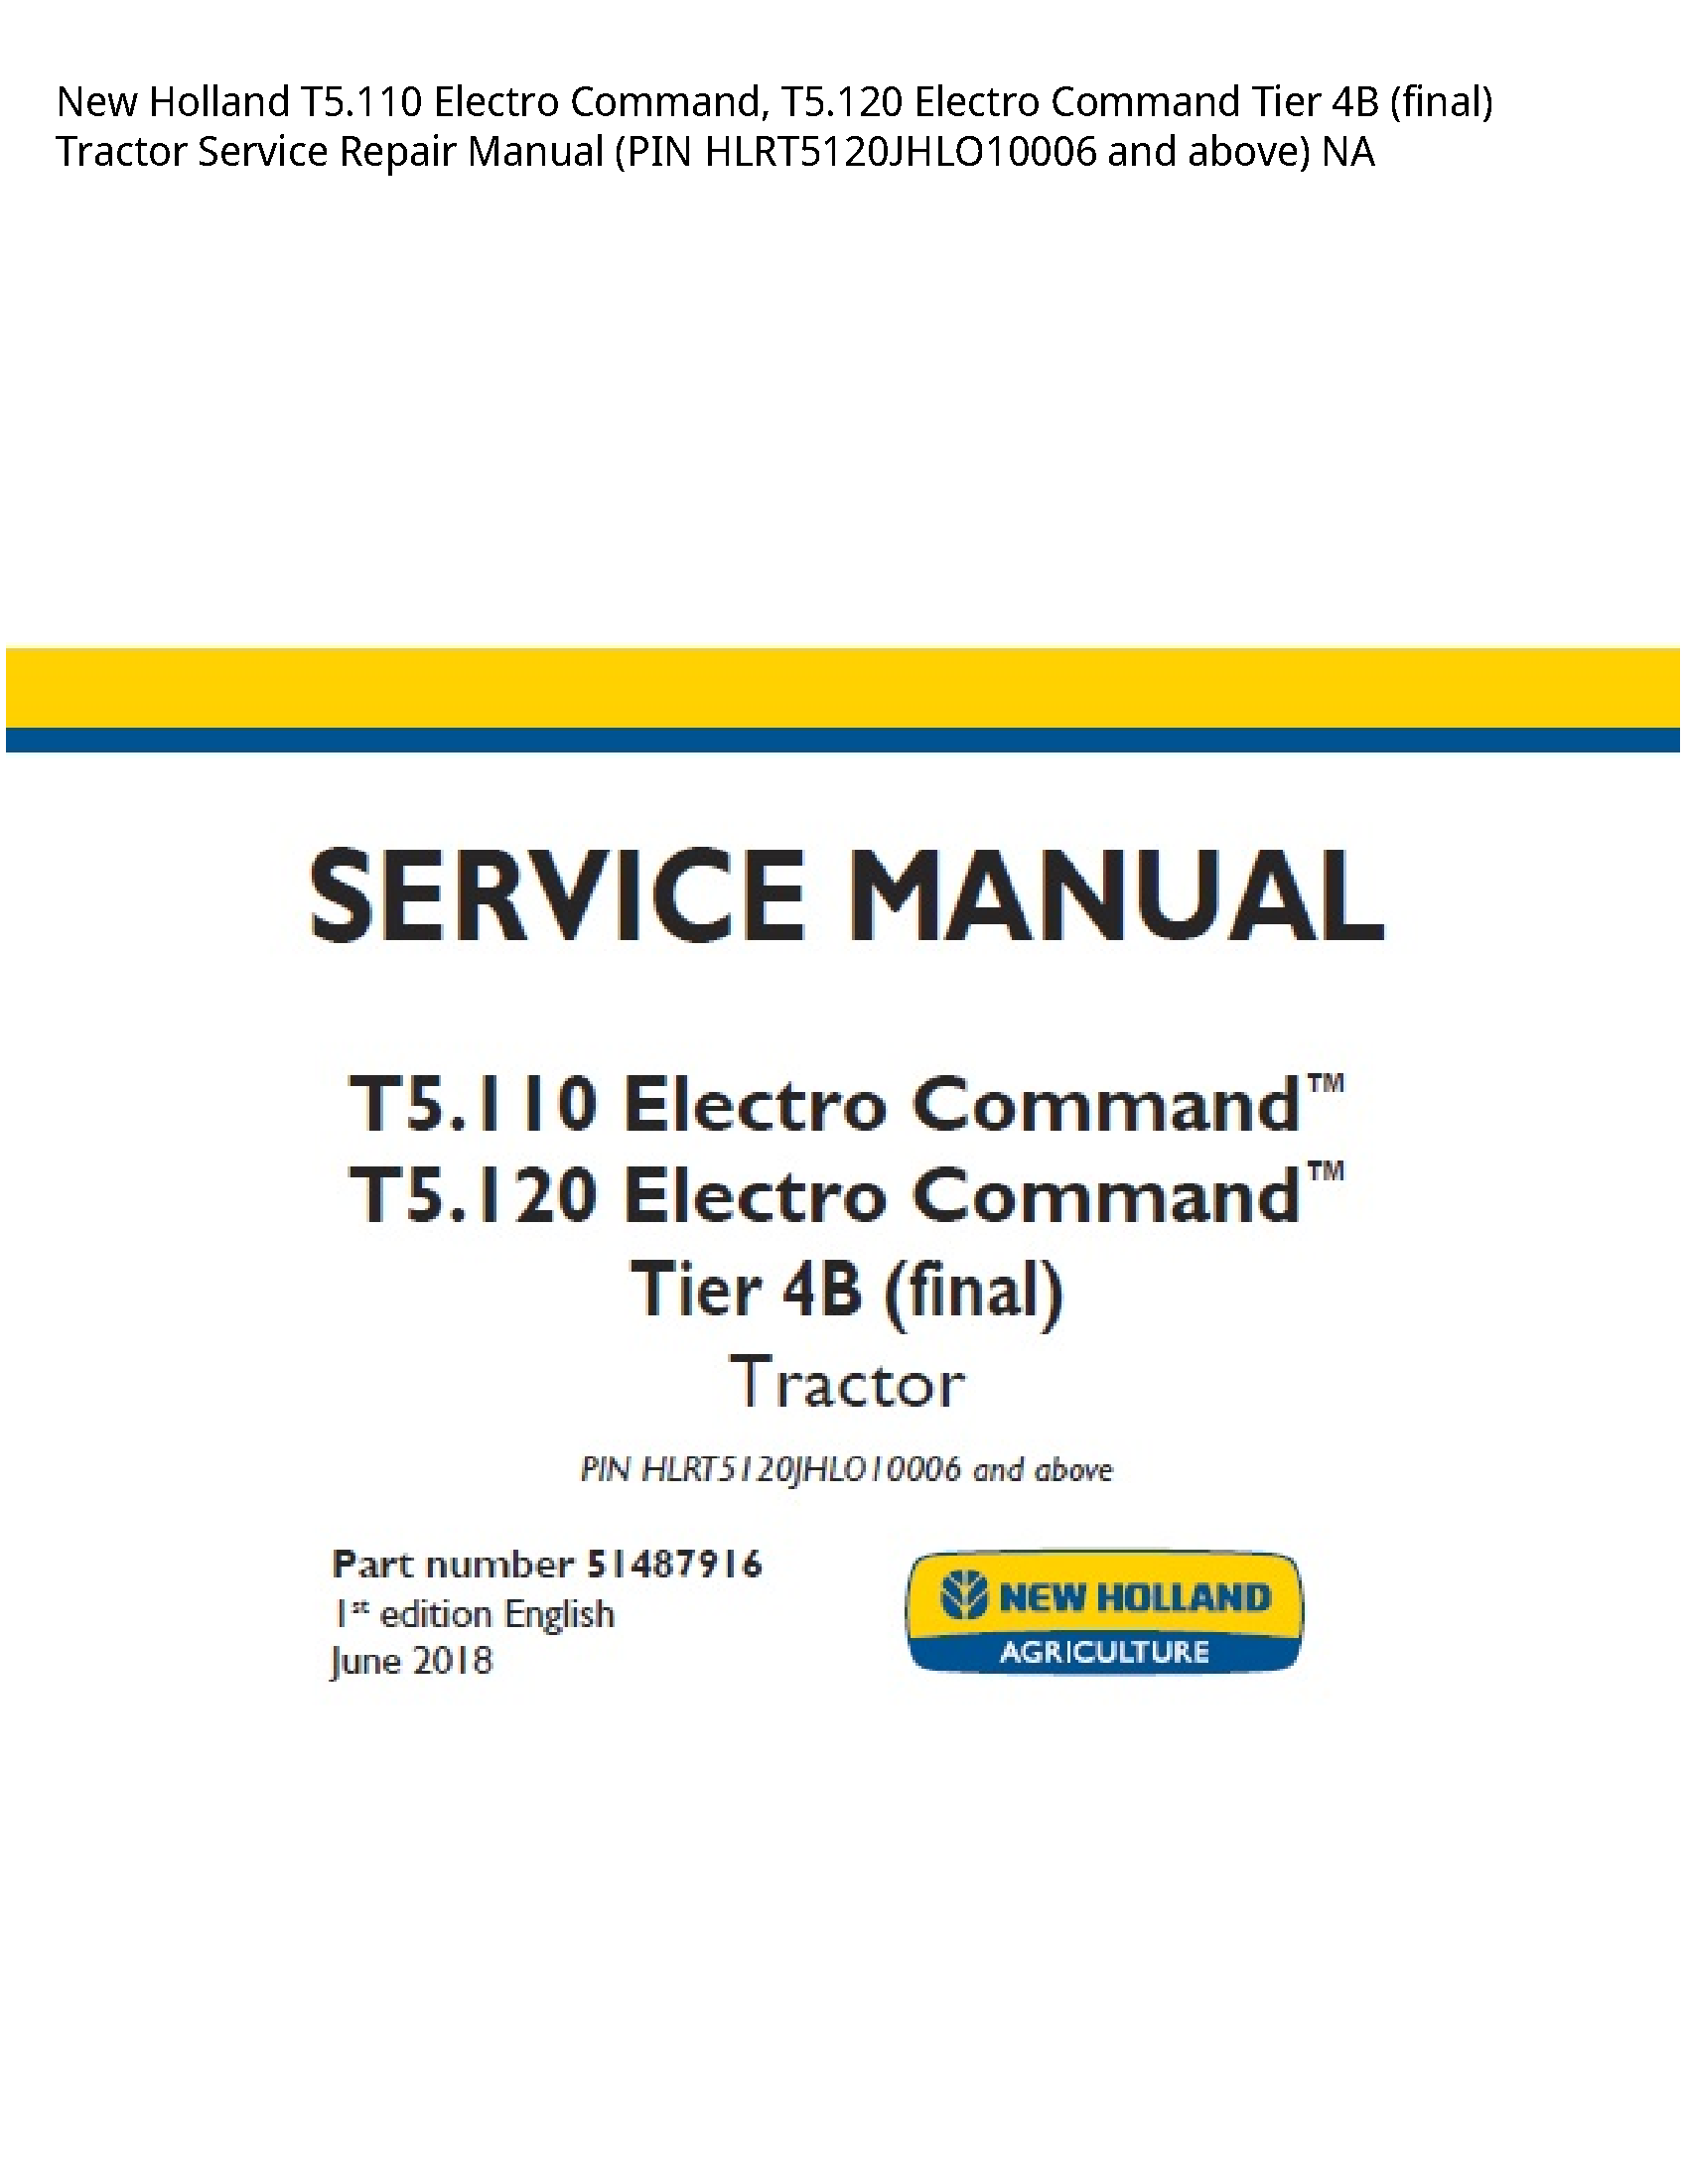 New Holland T5.110 Electro Command manual